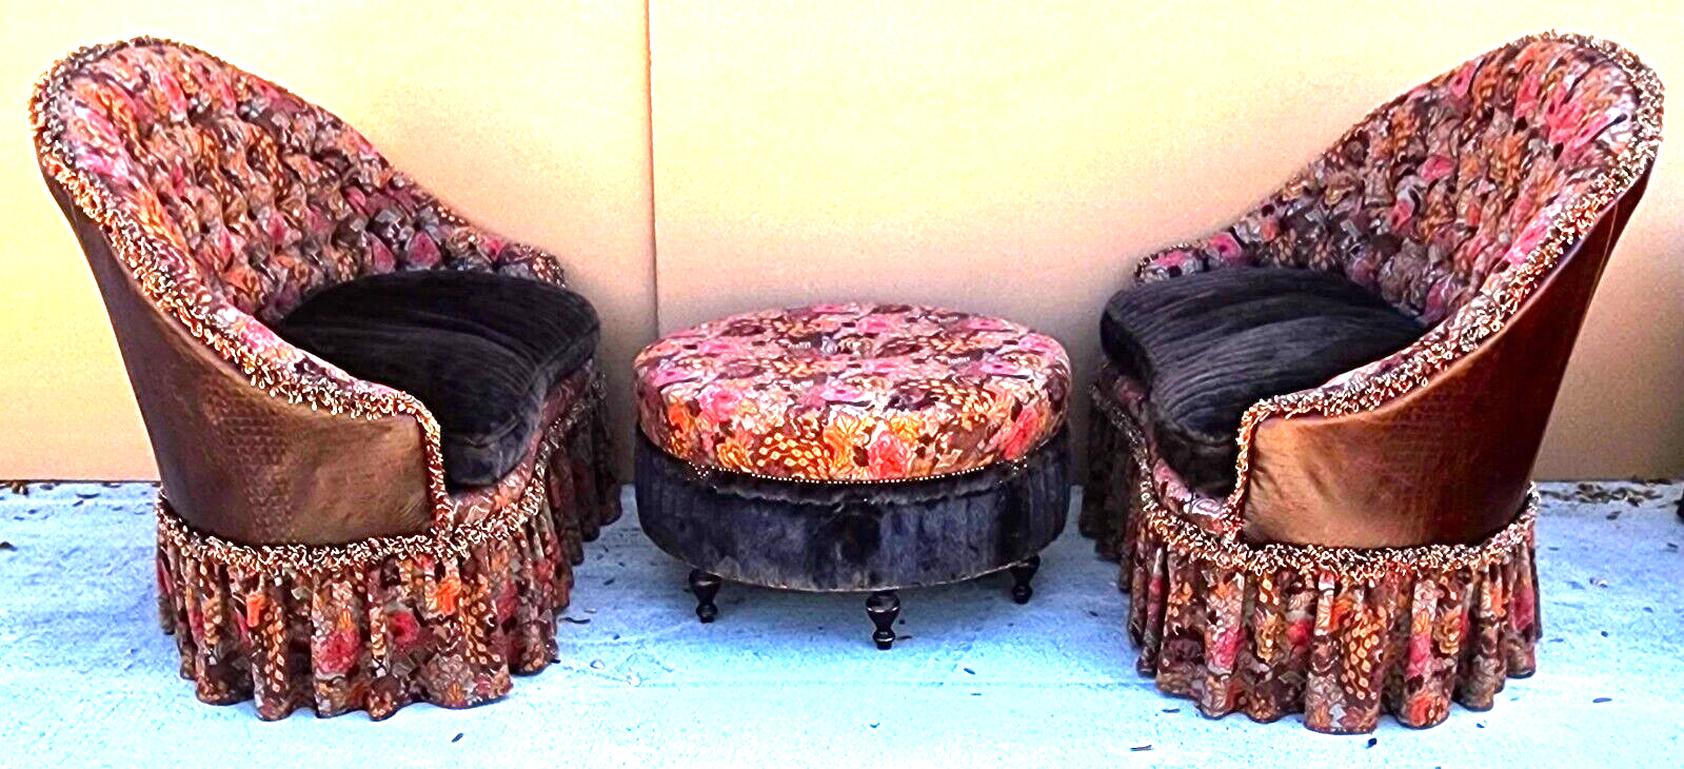 For FULL item description click on CONTINUE READING at the bottom of this page.

Offering one of our recent palm beach estate fine furniture acquisitions of a
3 piece set of 2 settees & 1 cocktail table ottoman by Old Hickory Tannery
Featuring